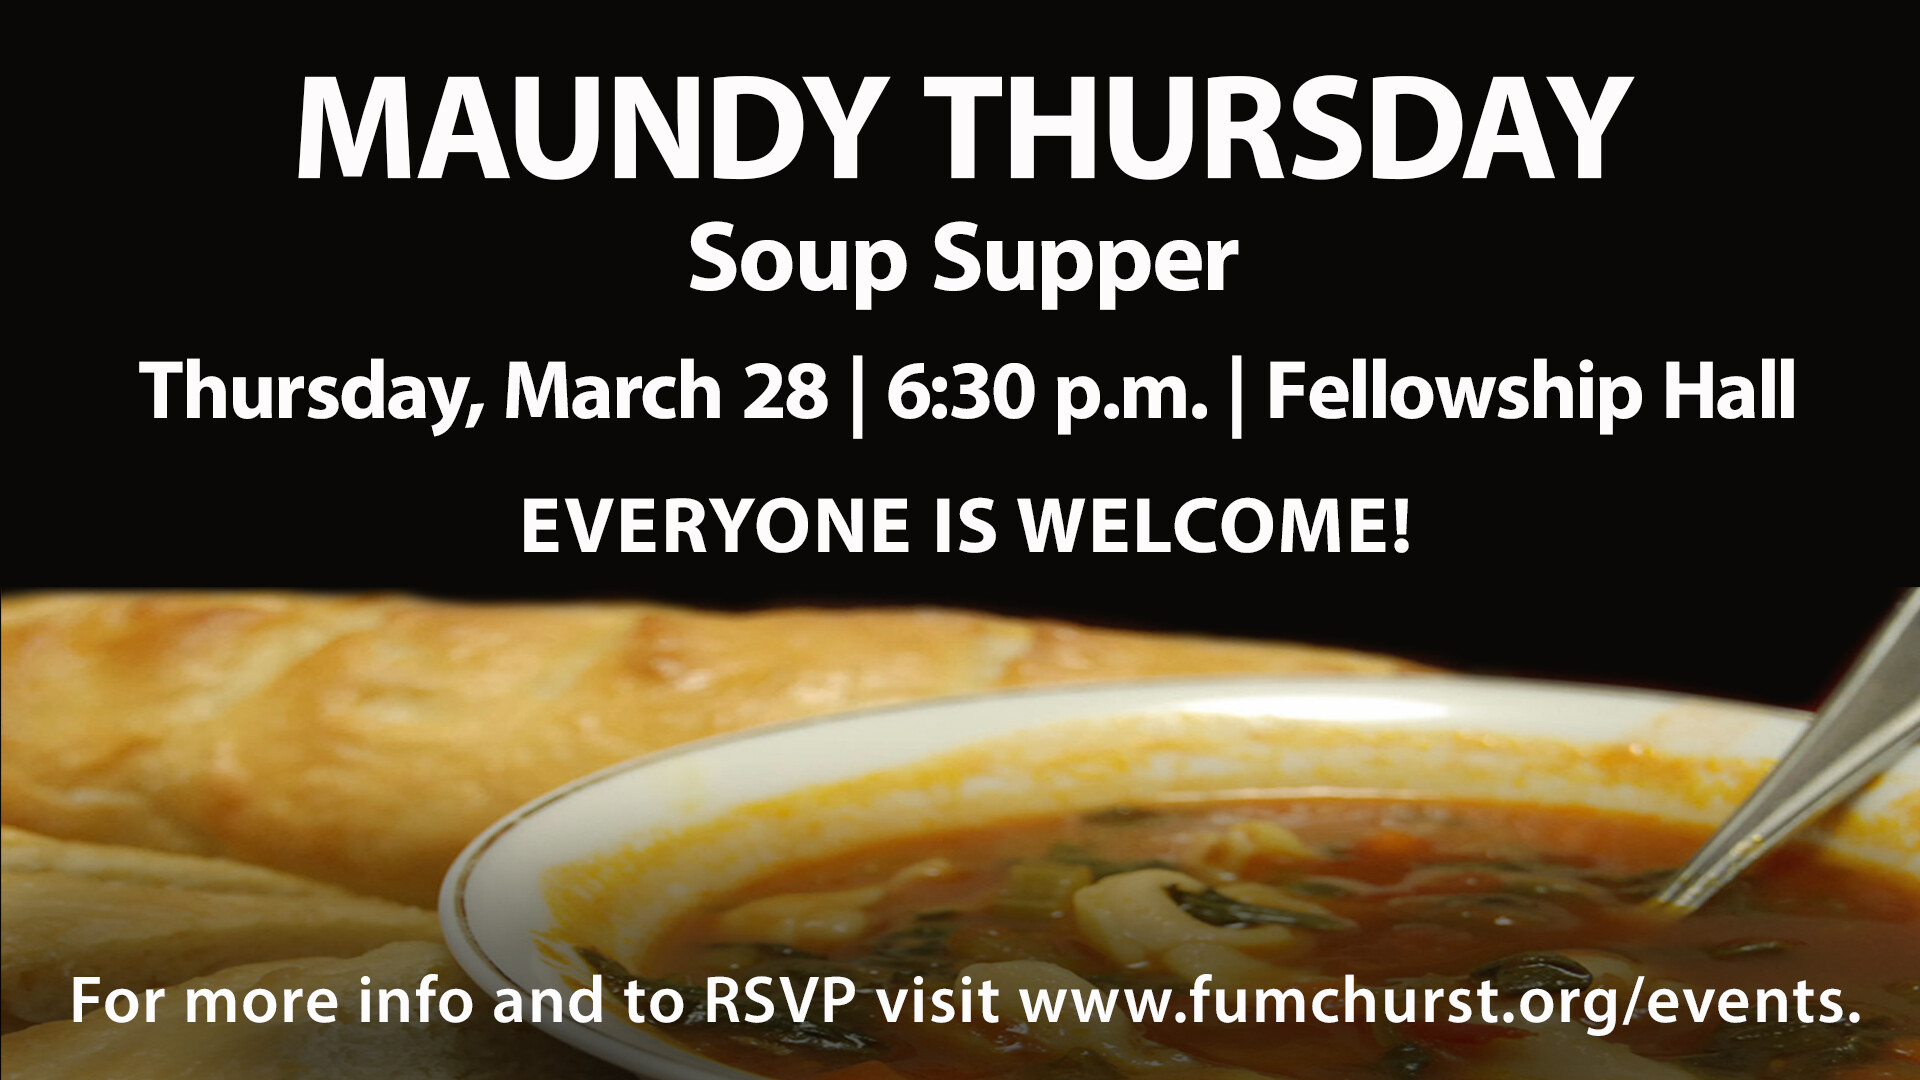 Maundy Thursday Soup Supper and Communion - Fellowship Hall